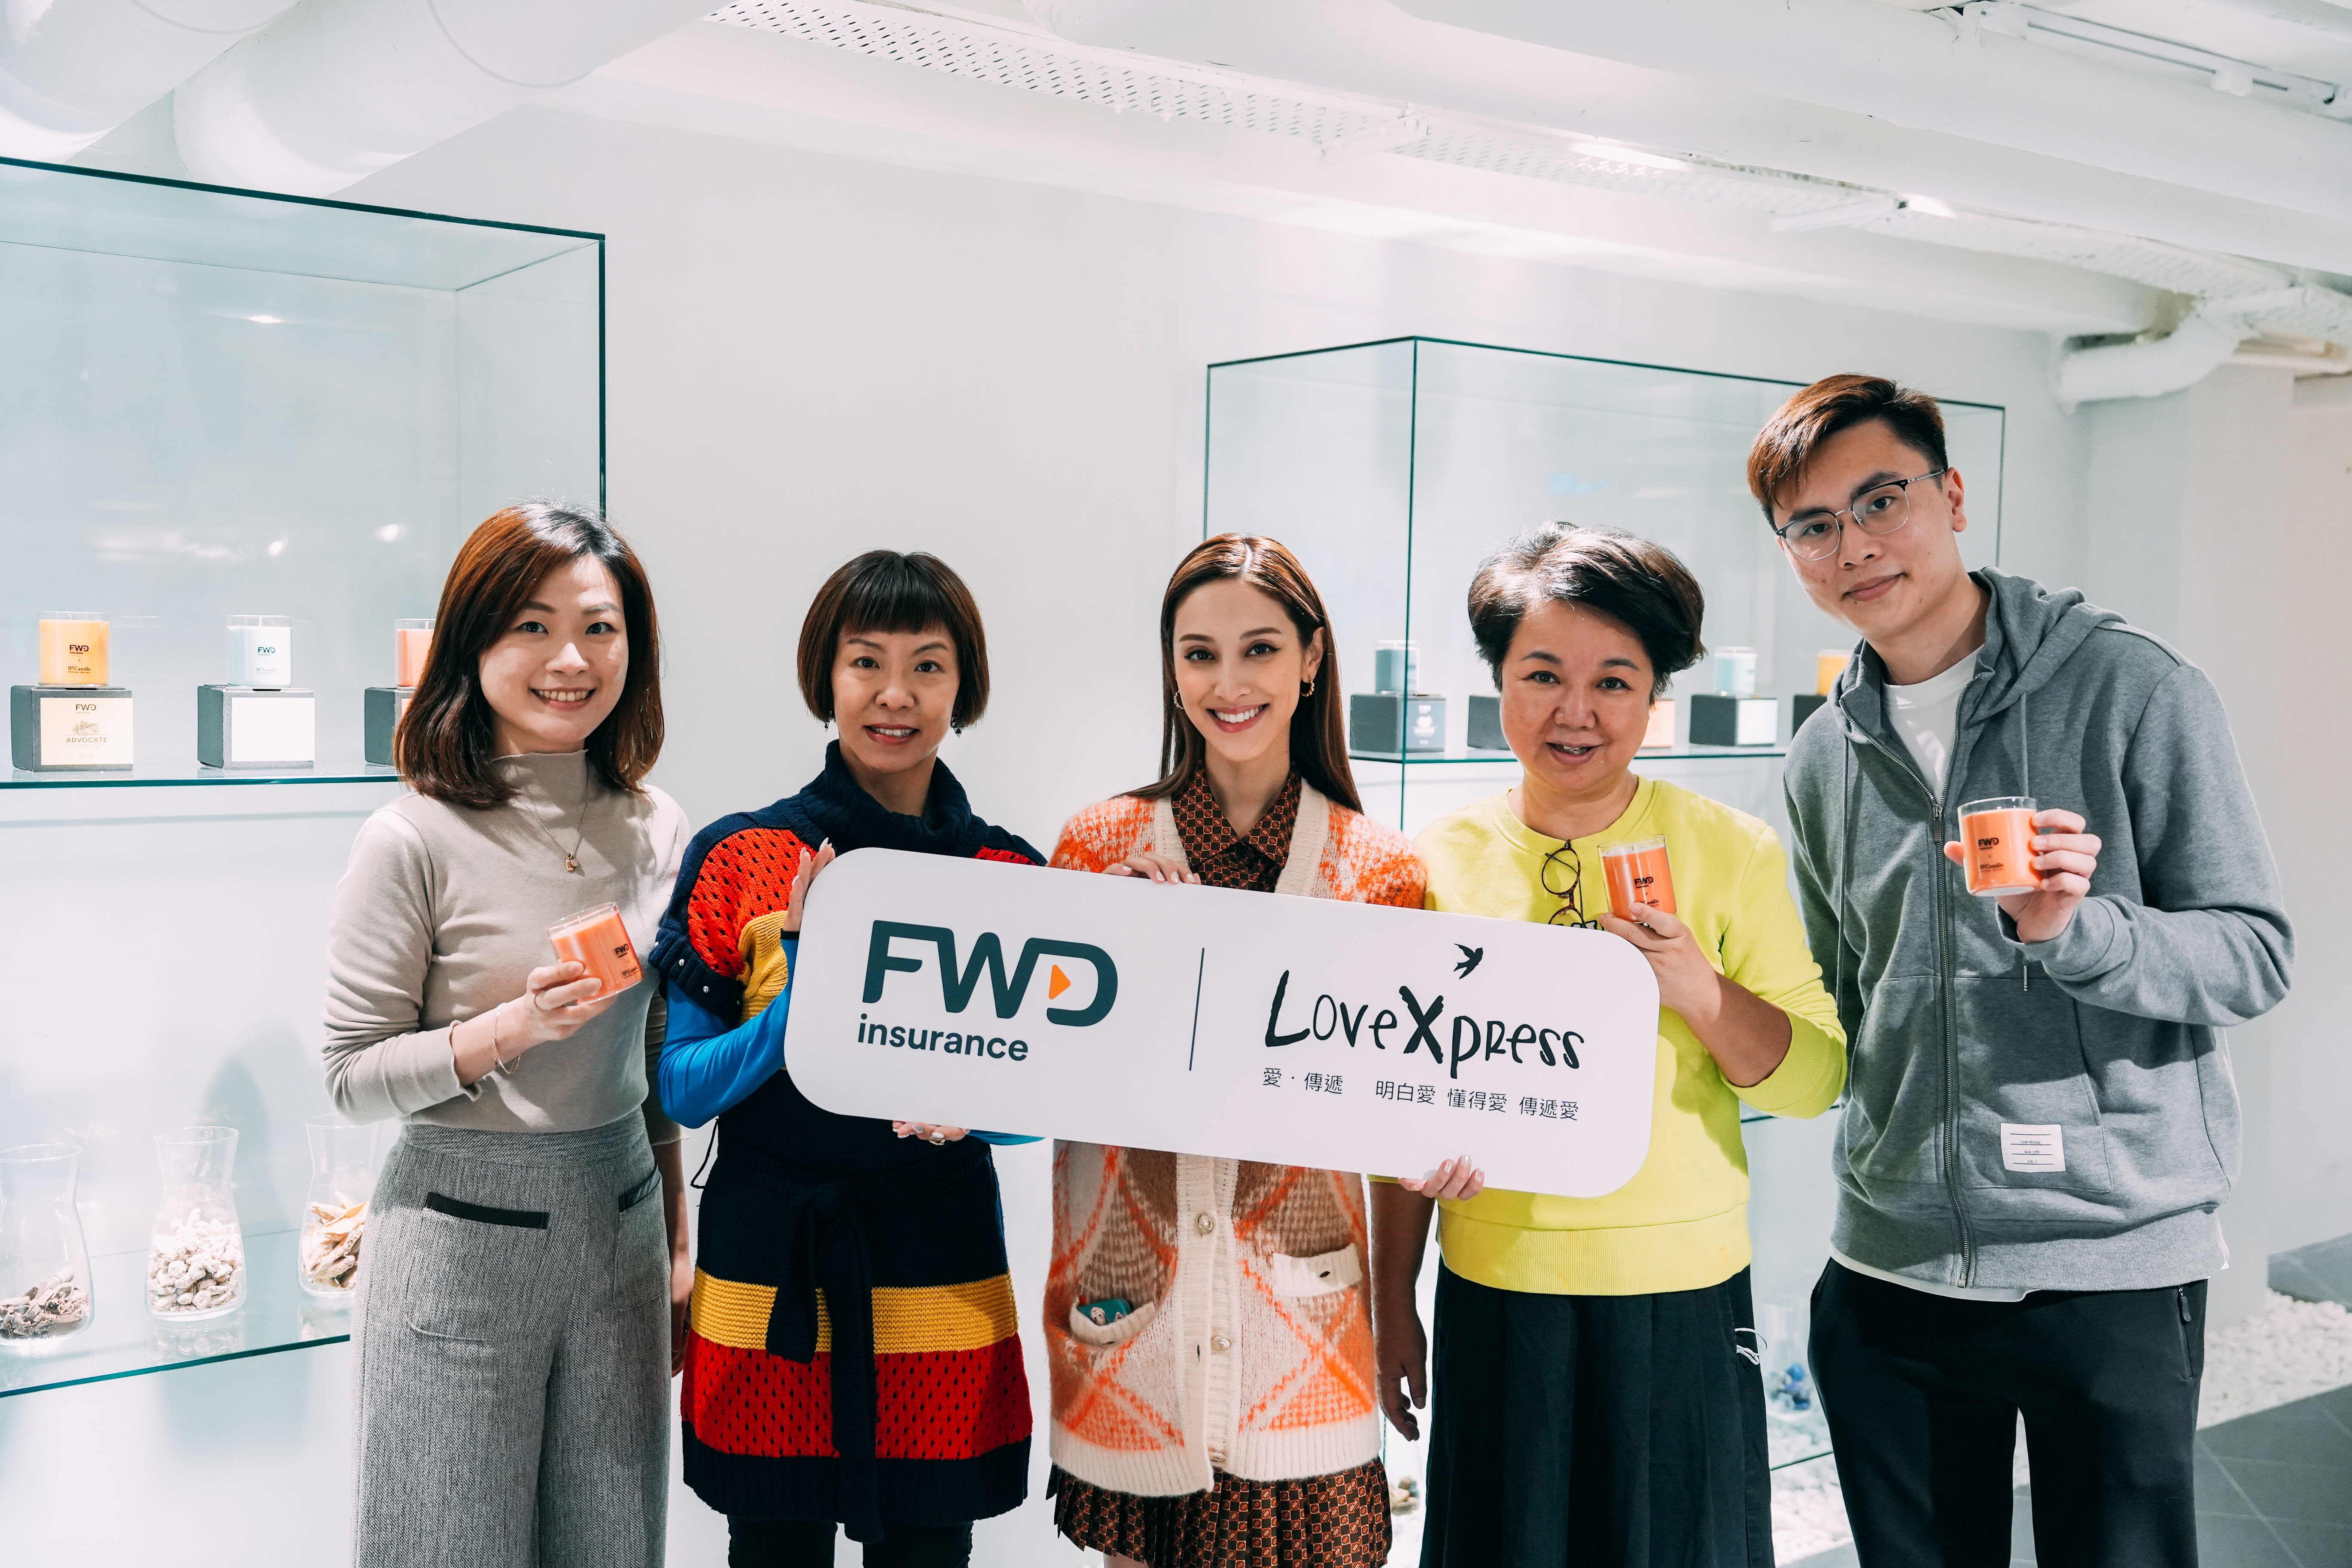 FWD collaborated with LoveXpress to host a scented candle workshop to create their exclusive scented candle - ‘Friend’, which represents FWD’s care for autistic families as a warm and supportive friend.